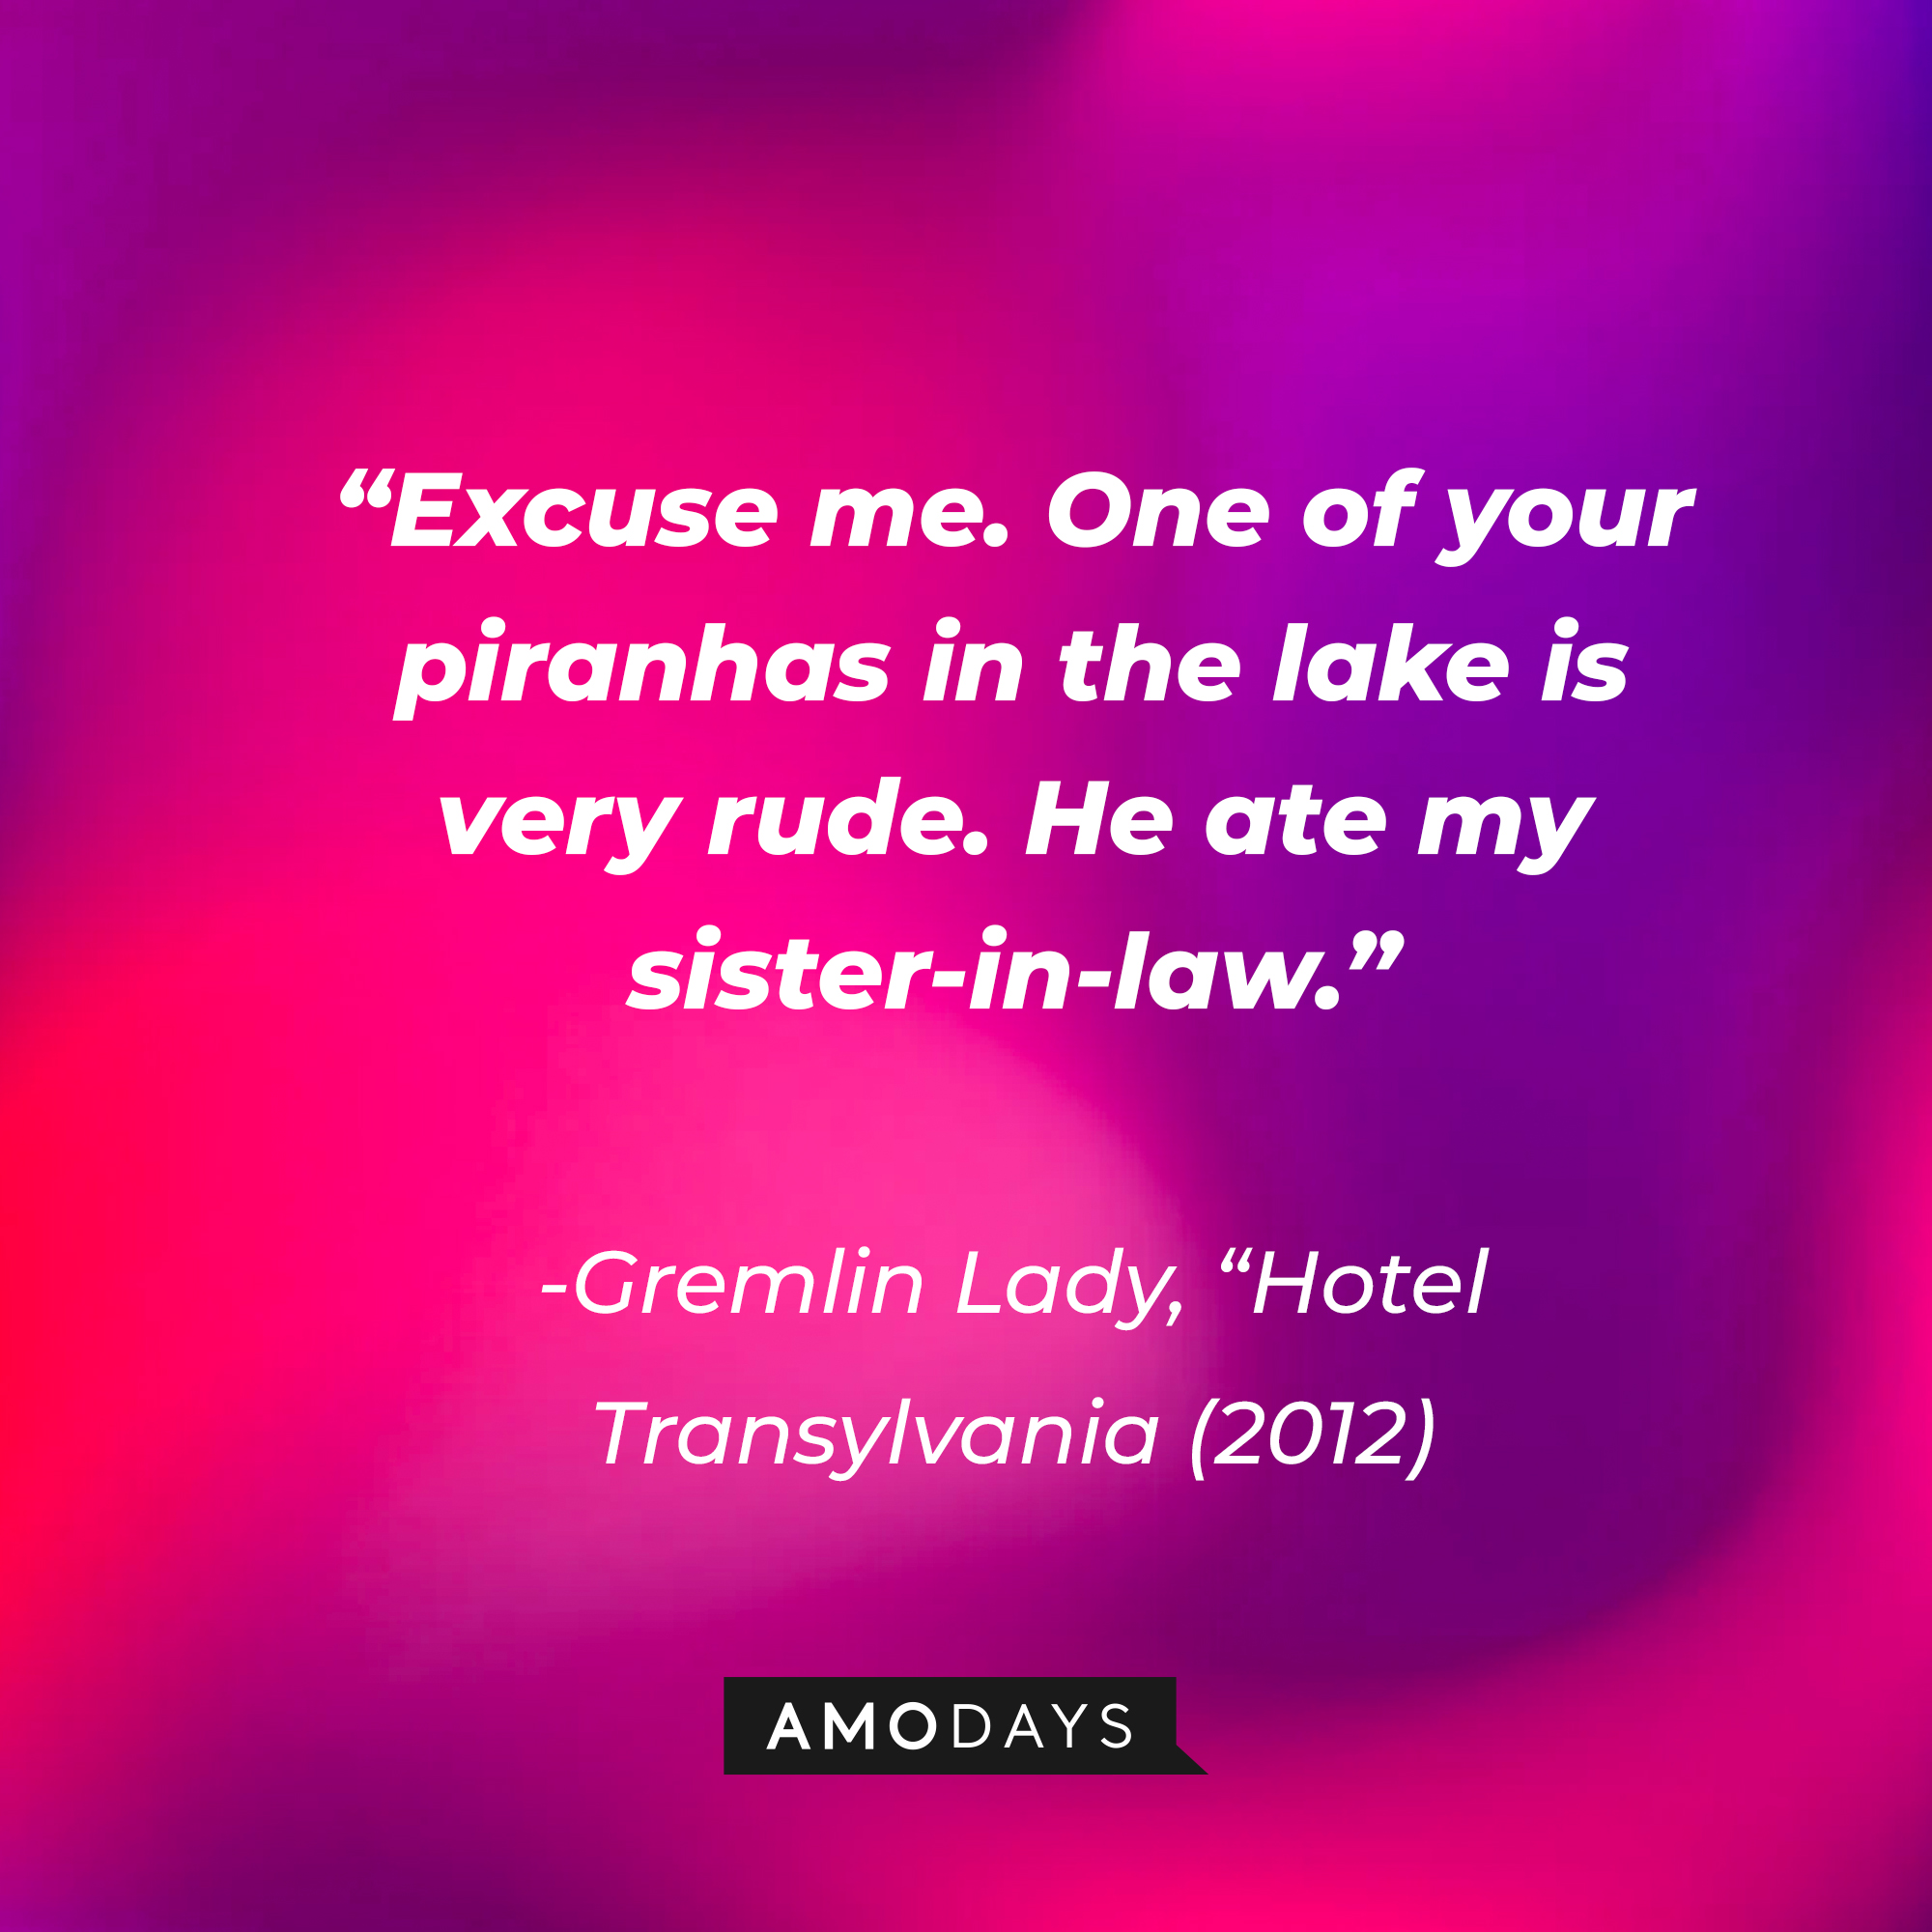 Gremlin Lady's quote: “Excuse me. One of your piranhas in the lake is very rude. He ate my sister-in-law.” | Source: Amodays